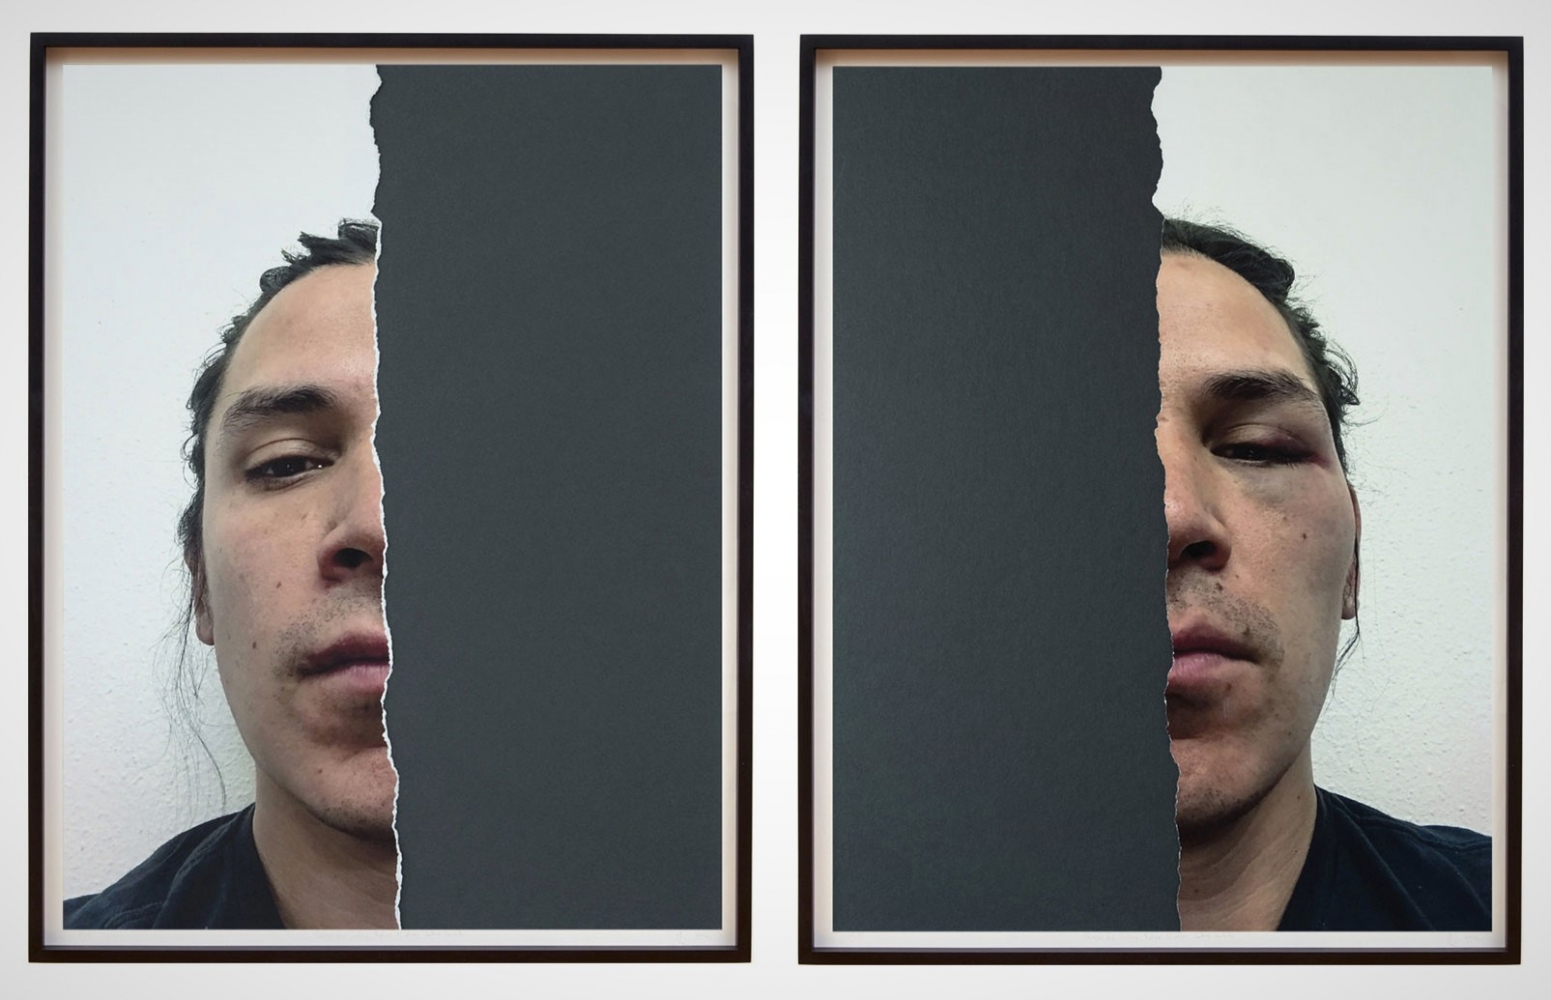 
Nicholas Galanin
The violence of blood quantum, half human (animal), half human (animal) after James Luna, 2019
diptych, portrait of the artist; both halves of torn archival digital print
20 1/2 x 15 1/2 inches (52.1 x 39.4 cm), each
Edition of 10
(NGA19-23)